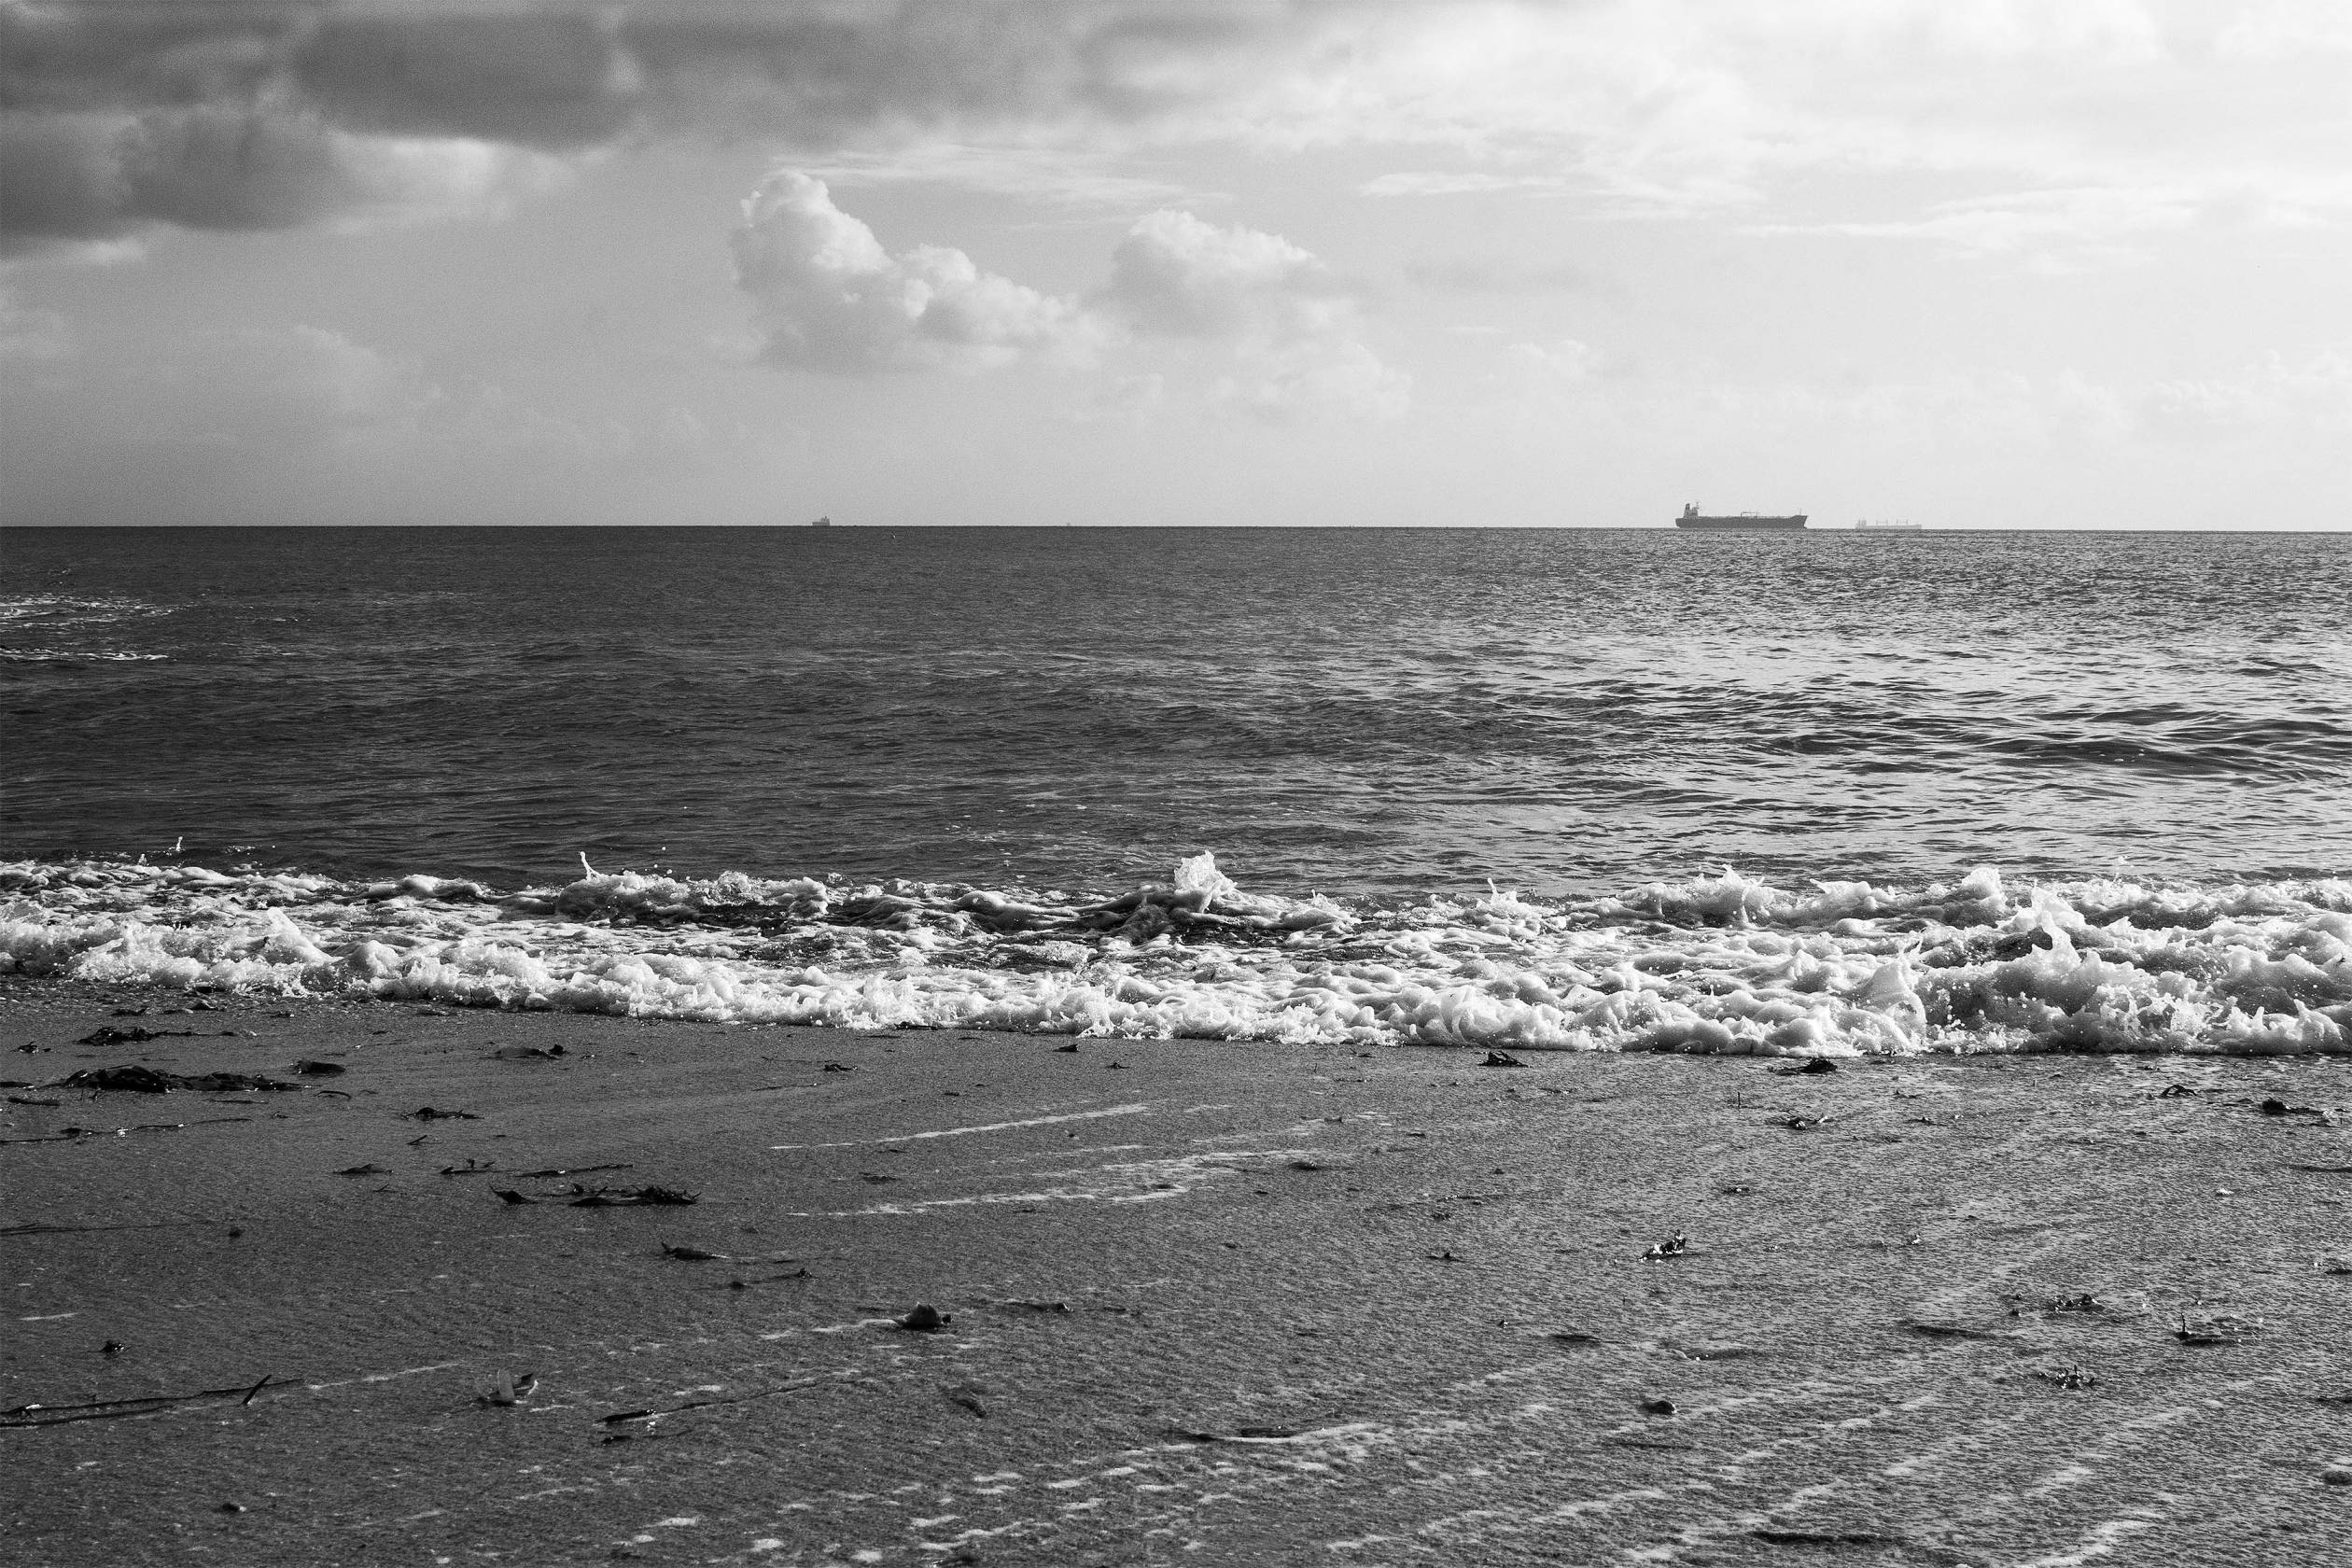 A black and white image of a beach, with foamy surf washing up against the sand. Two cargo ships can be seen in the distance